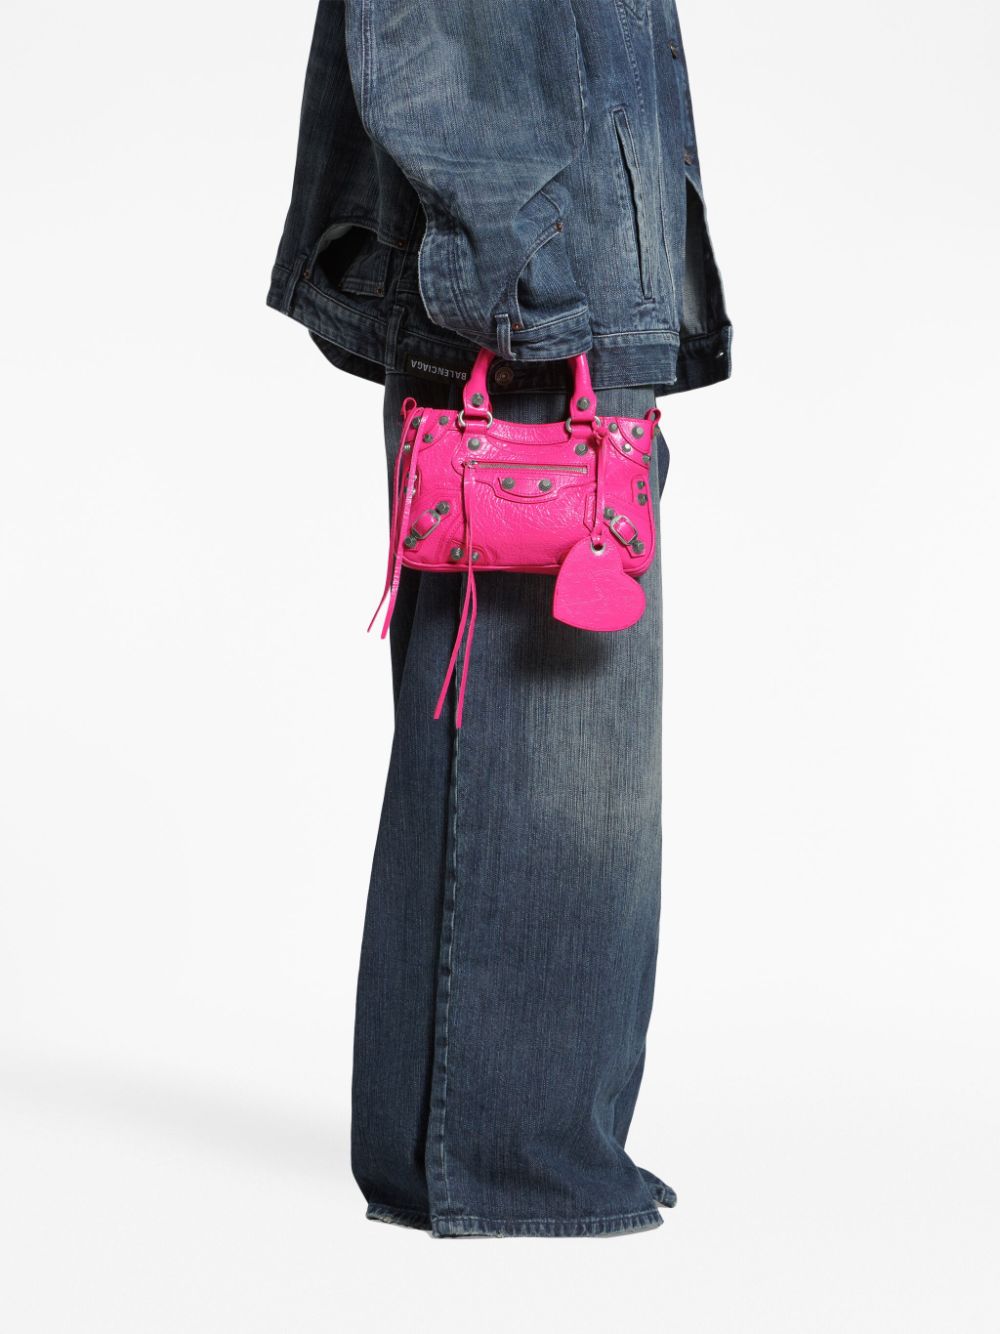 BALENCIAGA Fuchsia Pink Small Neo Cagole Lambskin Tote with Silver-Tone Details and Eco-Friendly Rating